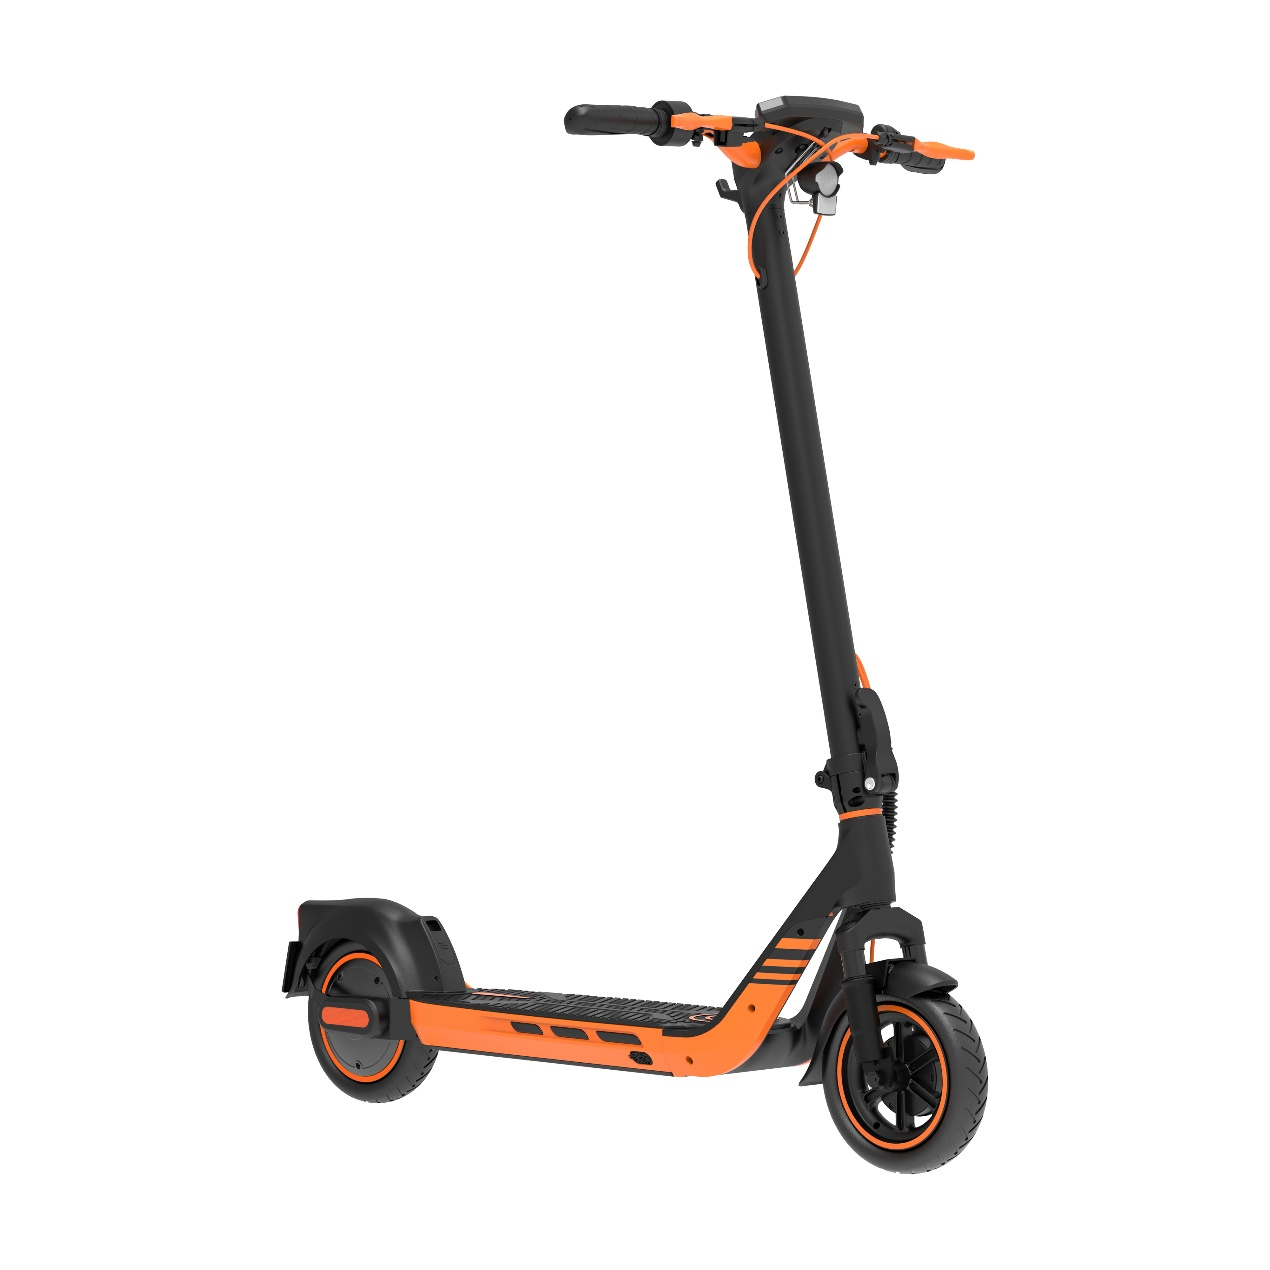 Electric Scooters Are Becoming a New Trend Among Commuters, and Where to Buy Them?